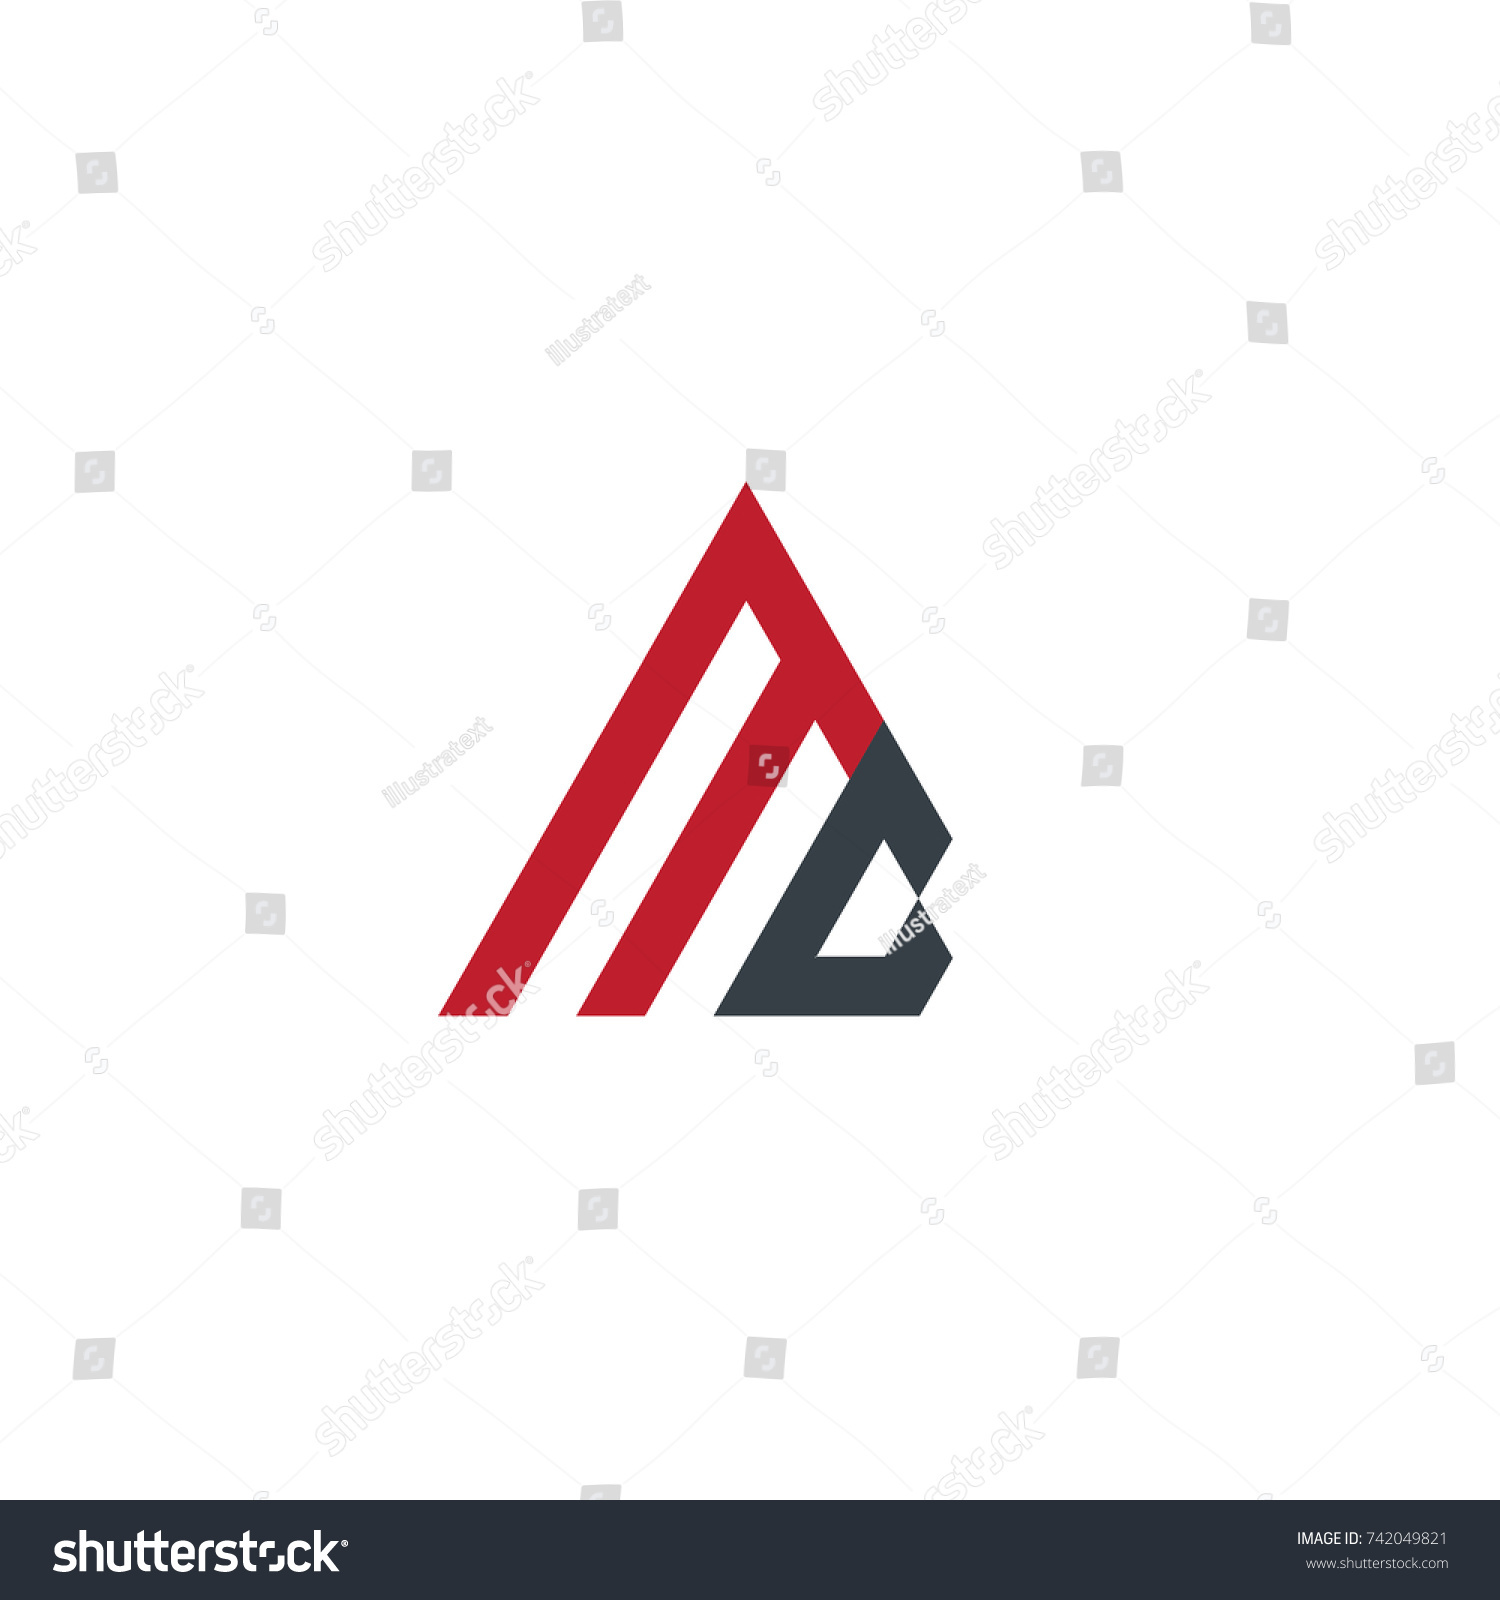 Initial Letter Mg Linked Triangle Design Stock Vector (Royalty Free ...